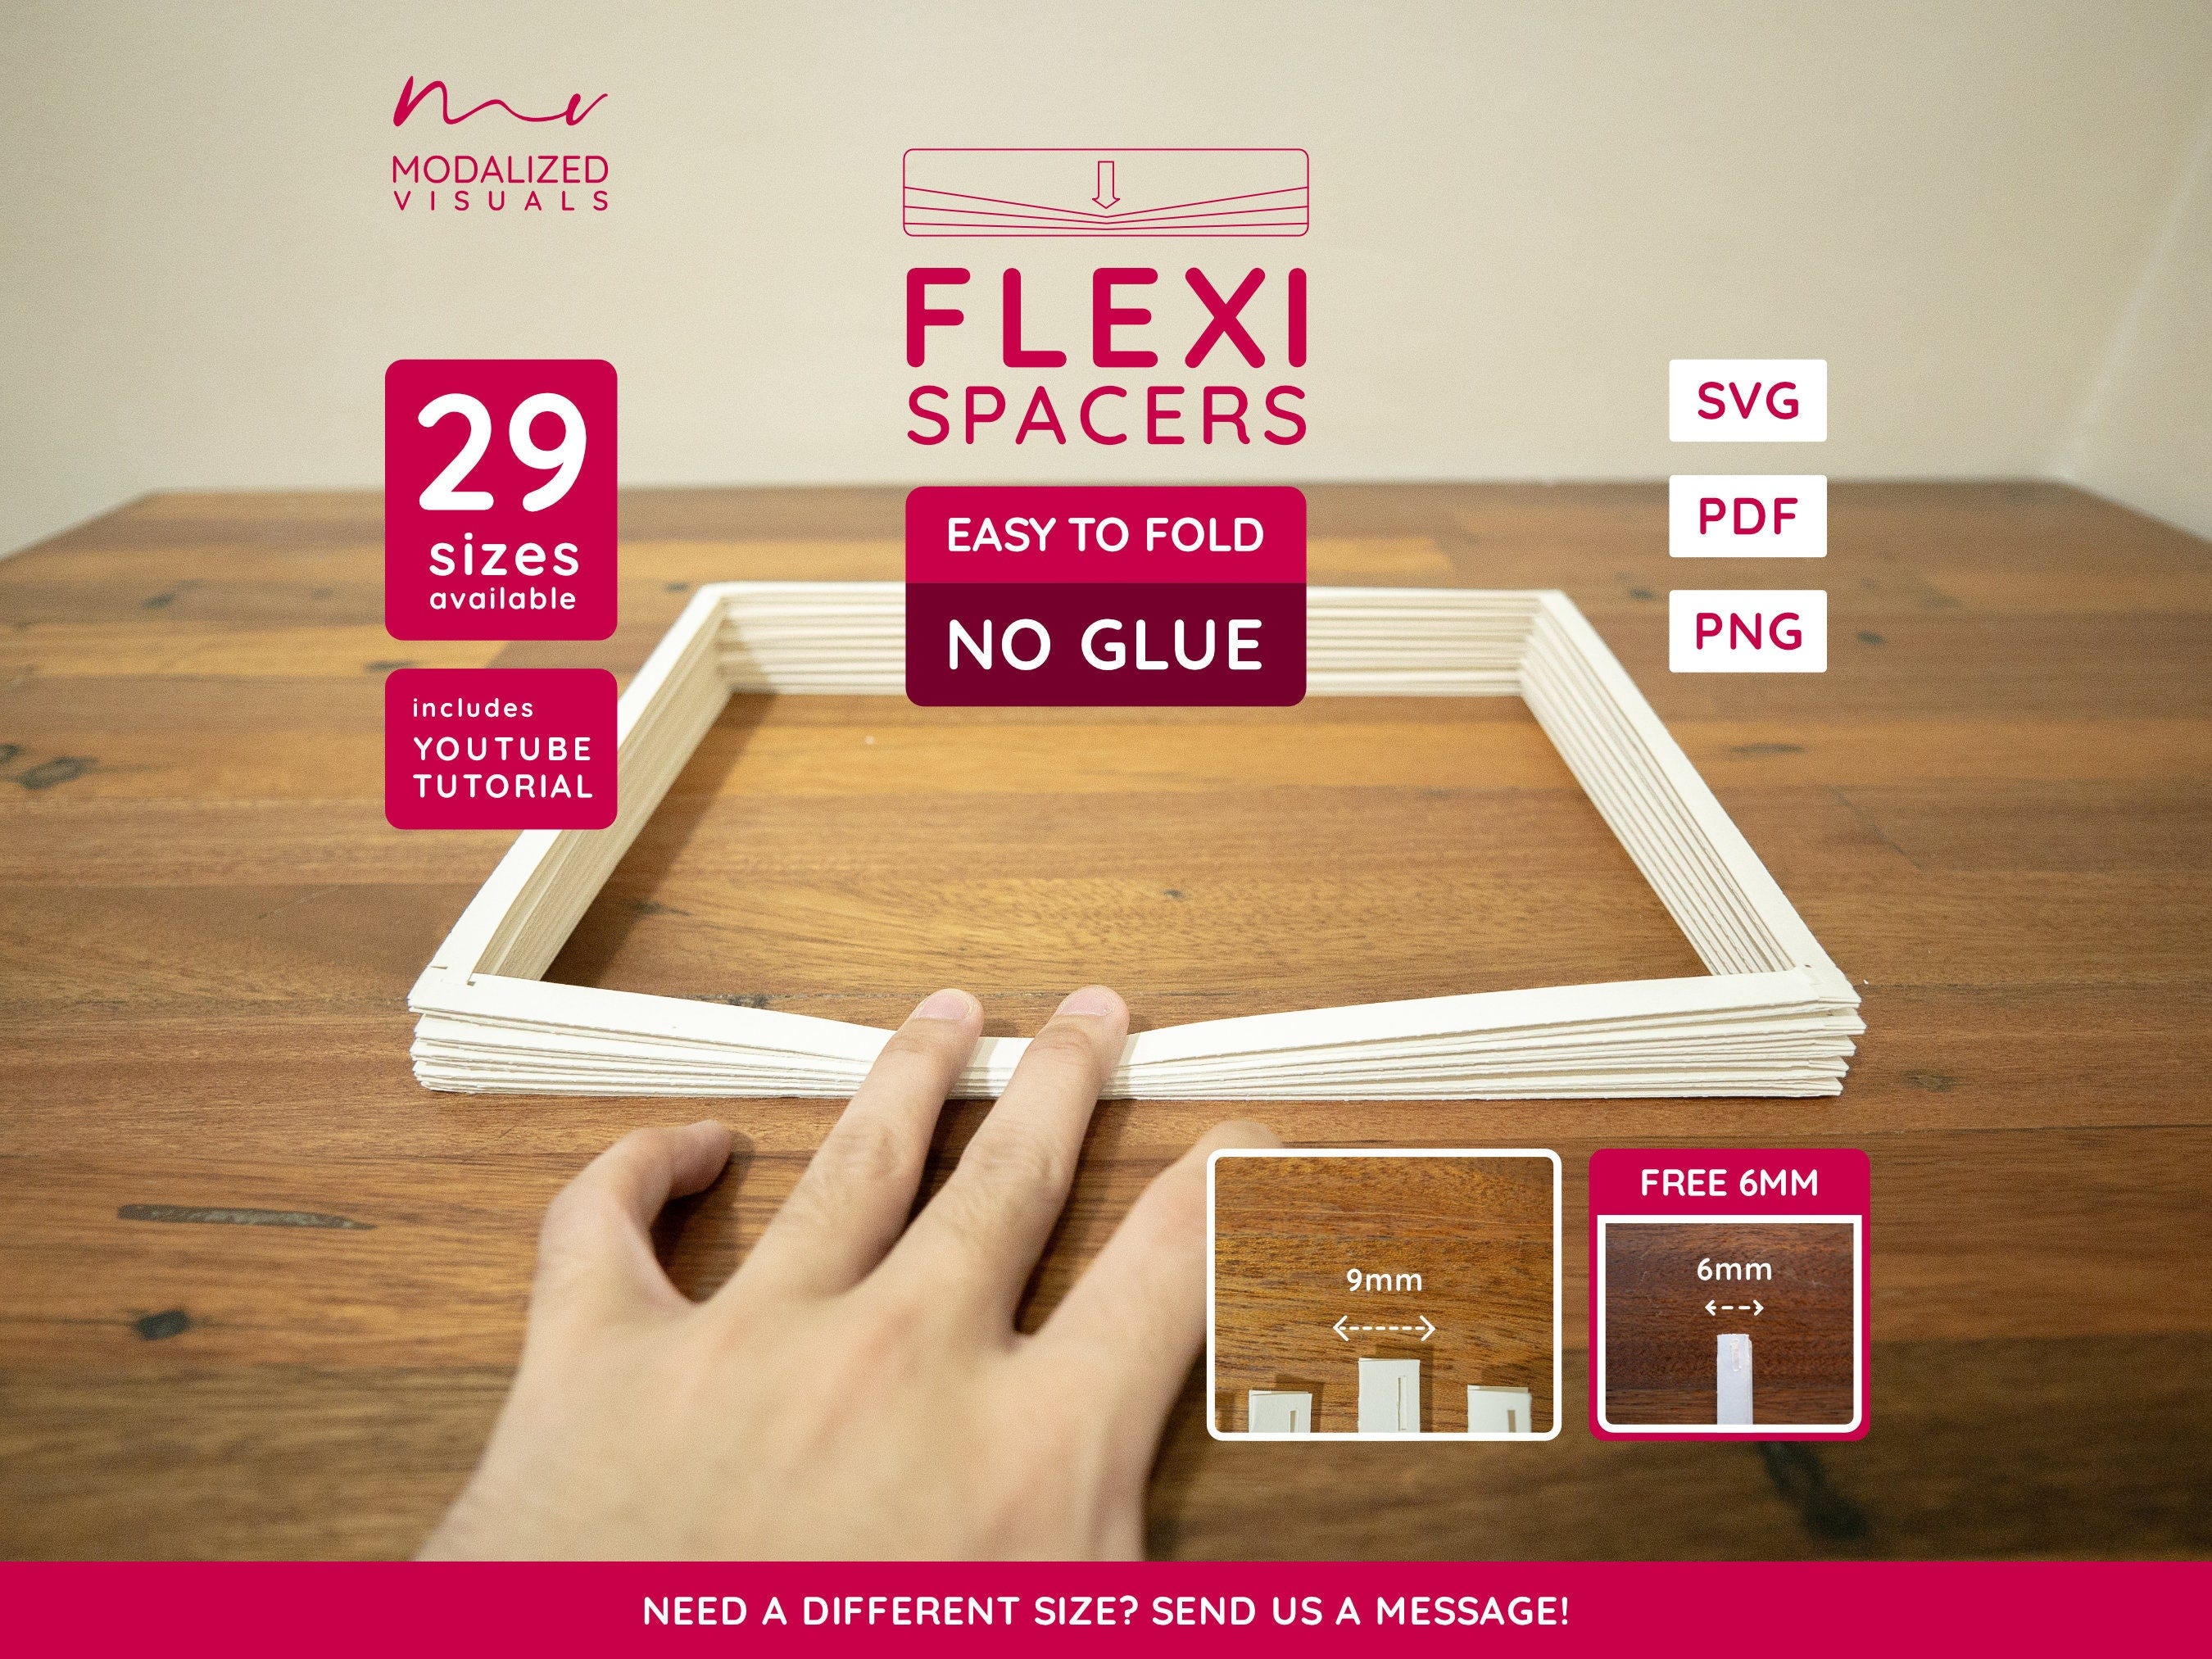 Flexi Paper Spacers Template For Your Light Box and Shadow Box Art Crafts: 29 sizes available